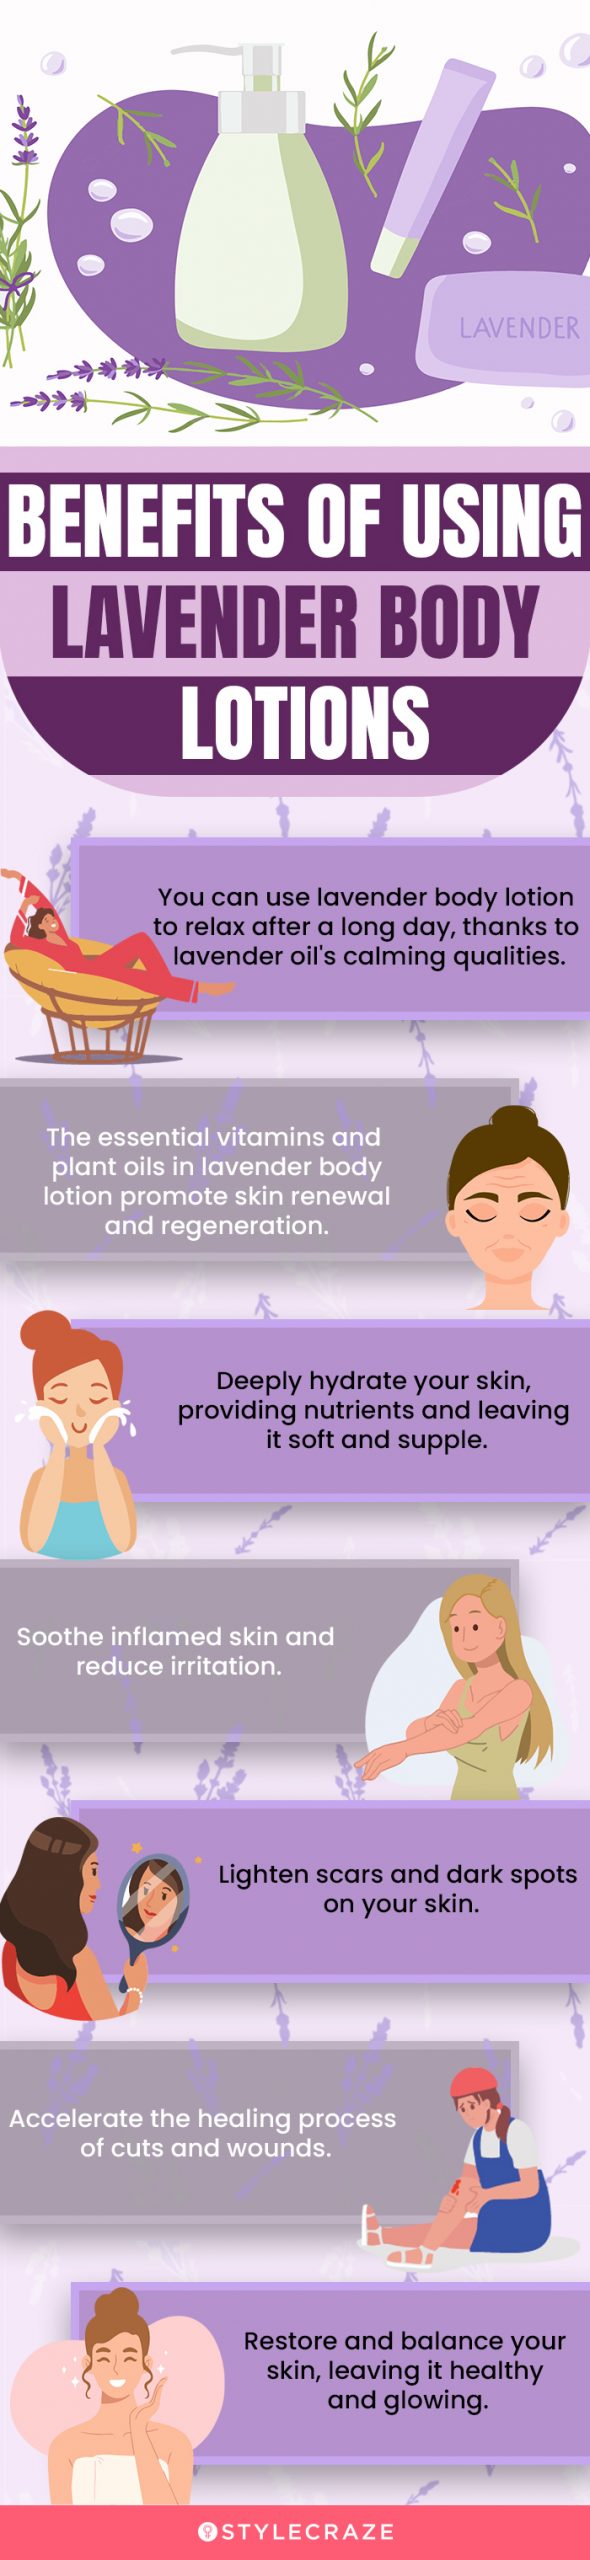 Benefits Of Using Lavender Body Lotions (infographic)